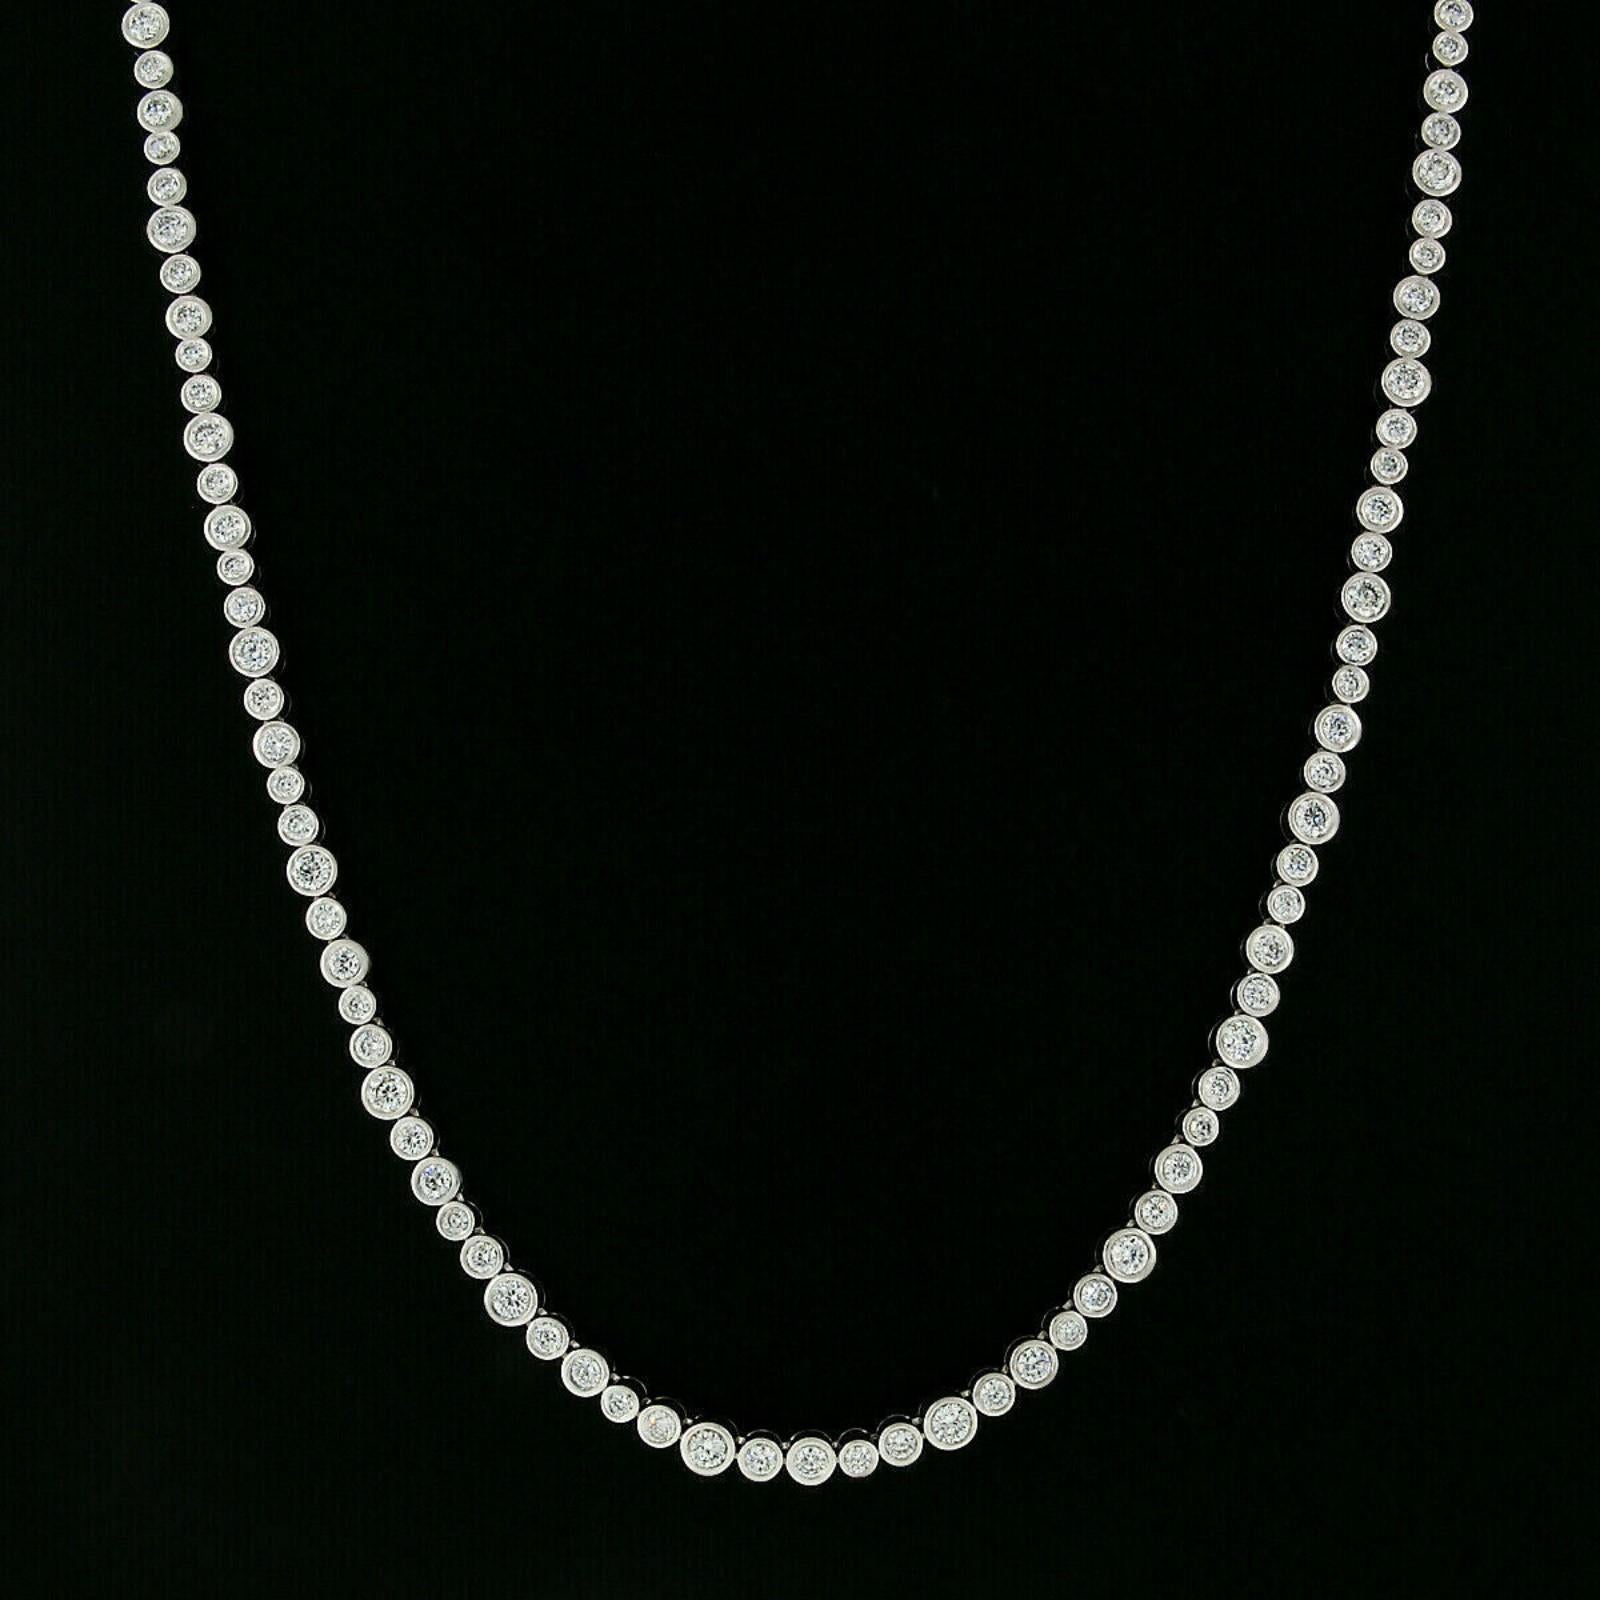 This absolutely breathtaking diamond tennis necklace is designed by Roberto Coin and crafted in Italy from solid 18k white gold. It features 88 super FINE quality round brilliant, CENTO cut diamonds. The signature CENTO diamond has 100 facets rather